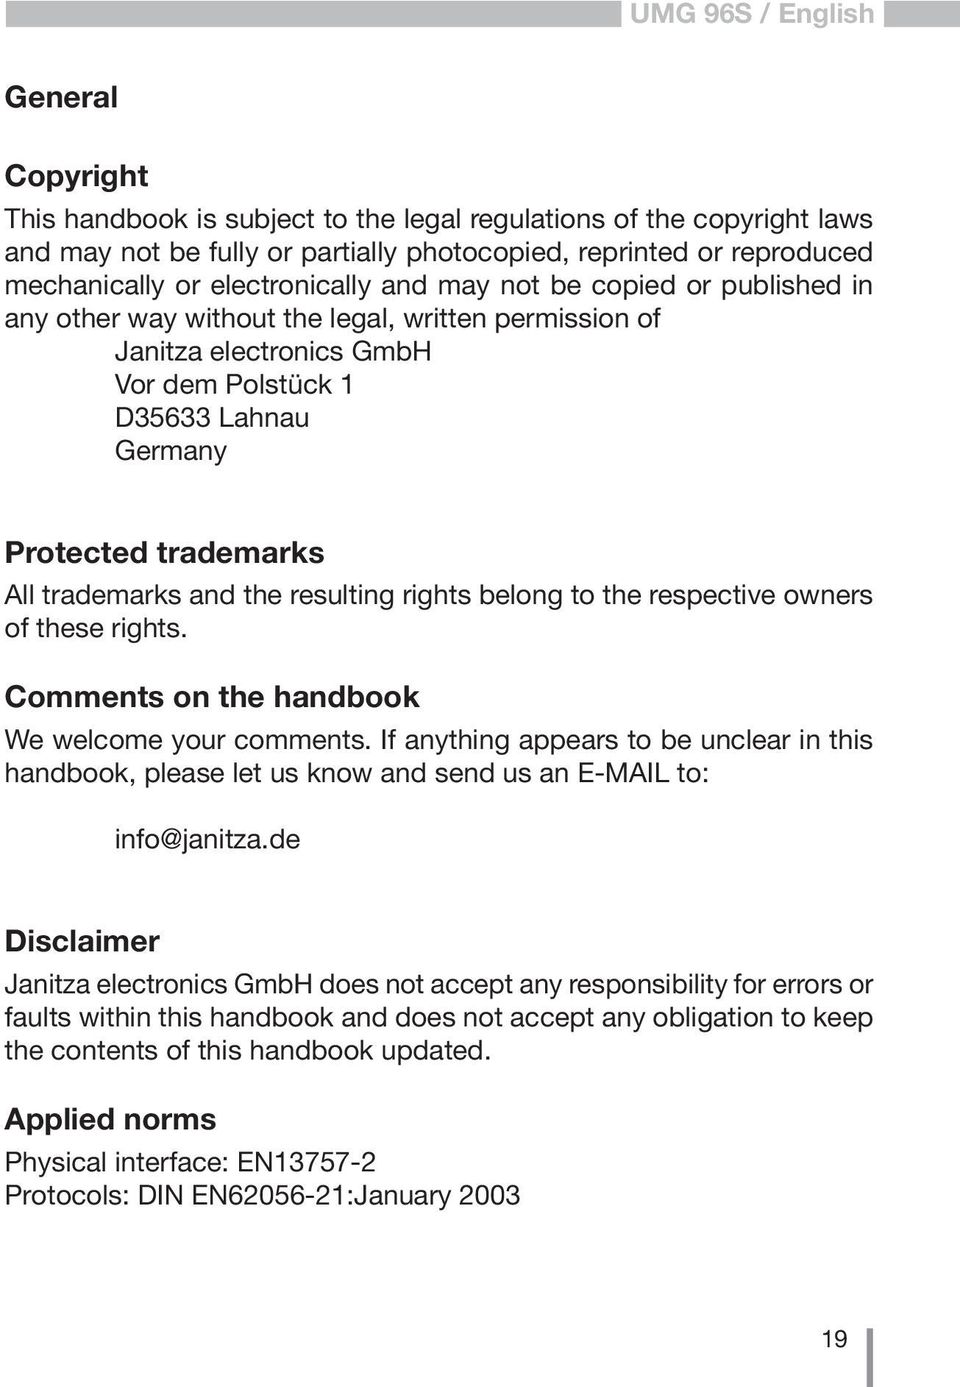 trademarks and the resulting rights belong to the respective owners of these rights. Comments on the handbook We welcome your comments.